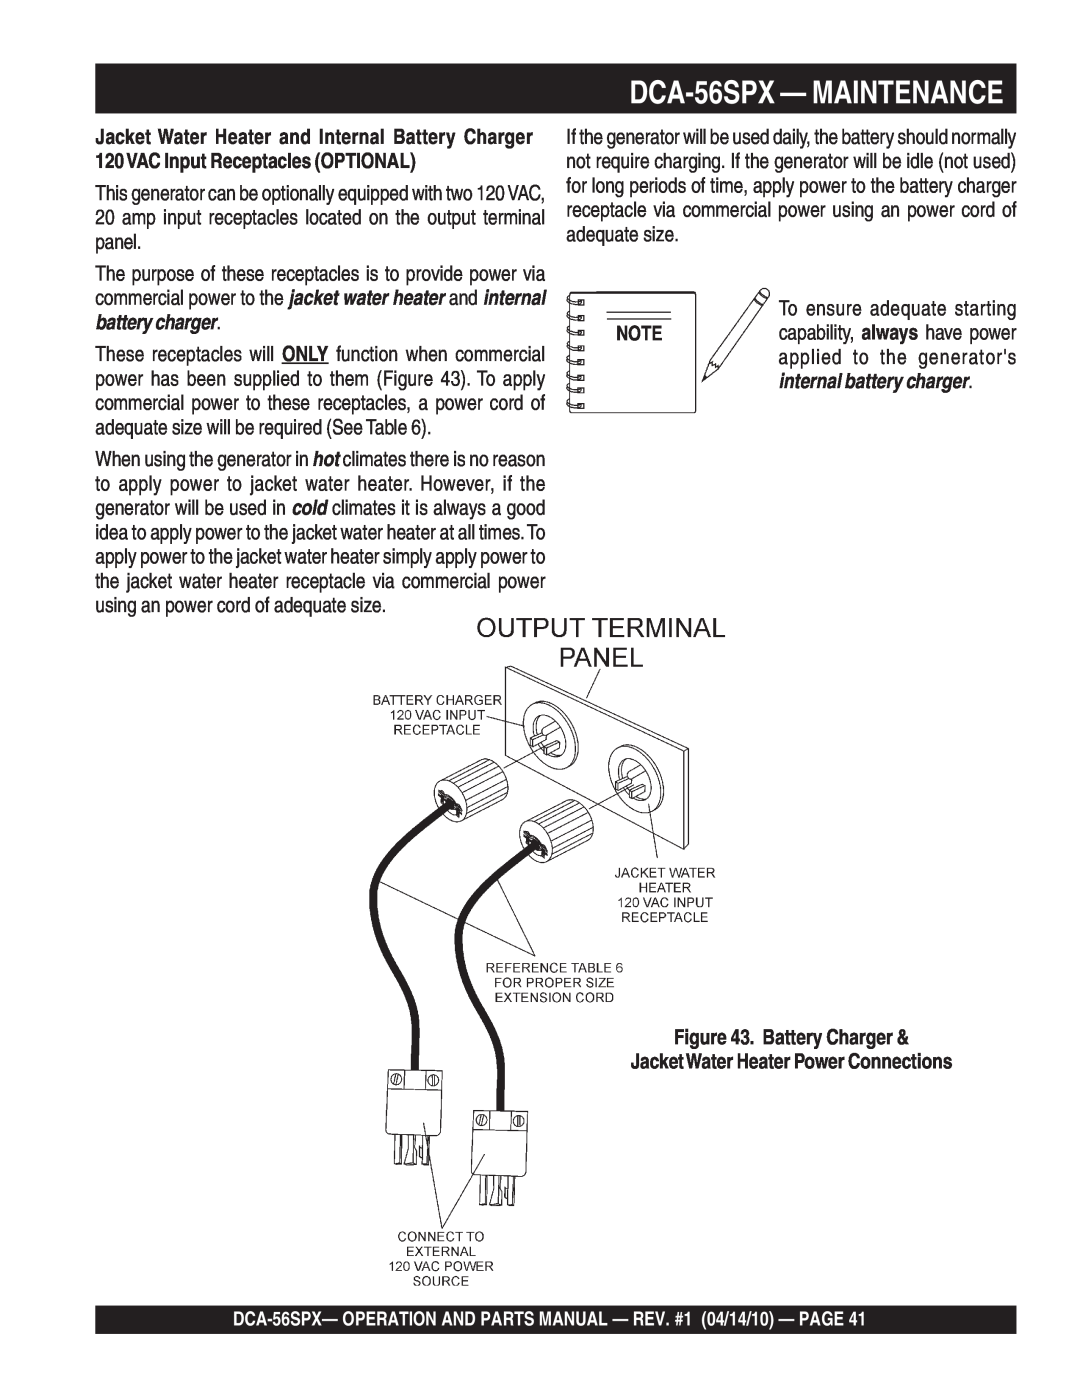 Multiquip operation manual DCA-56SPX- MAINTENANCE, Battery Charger, JacketWater Heater Power Connections 